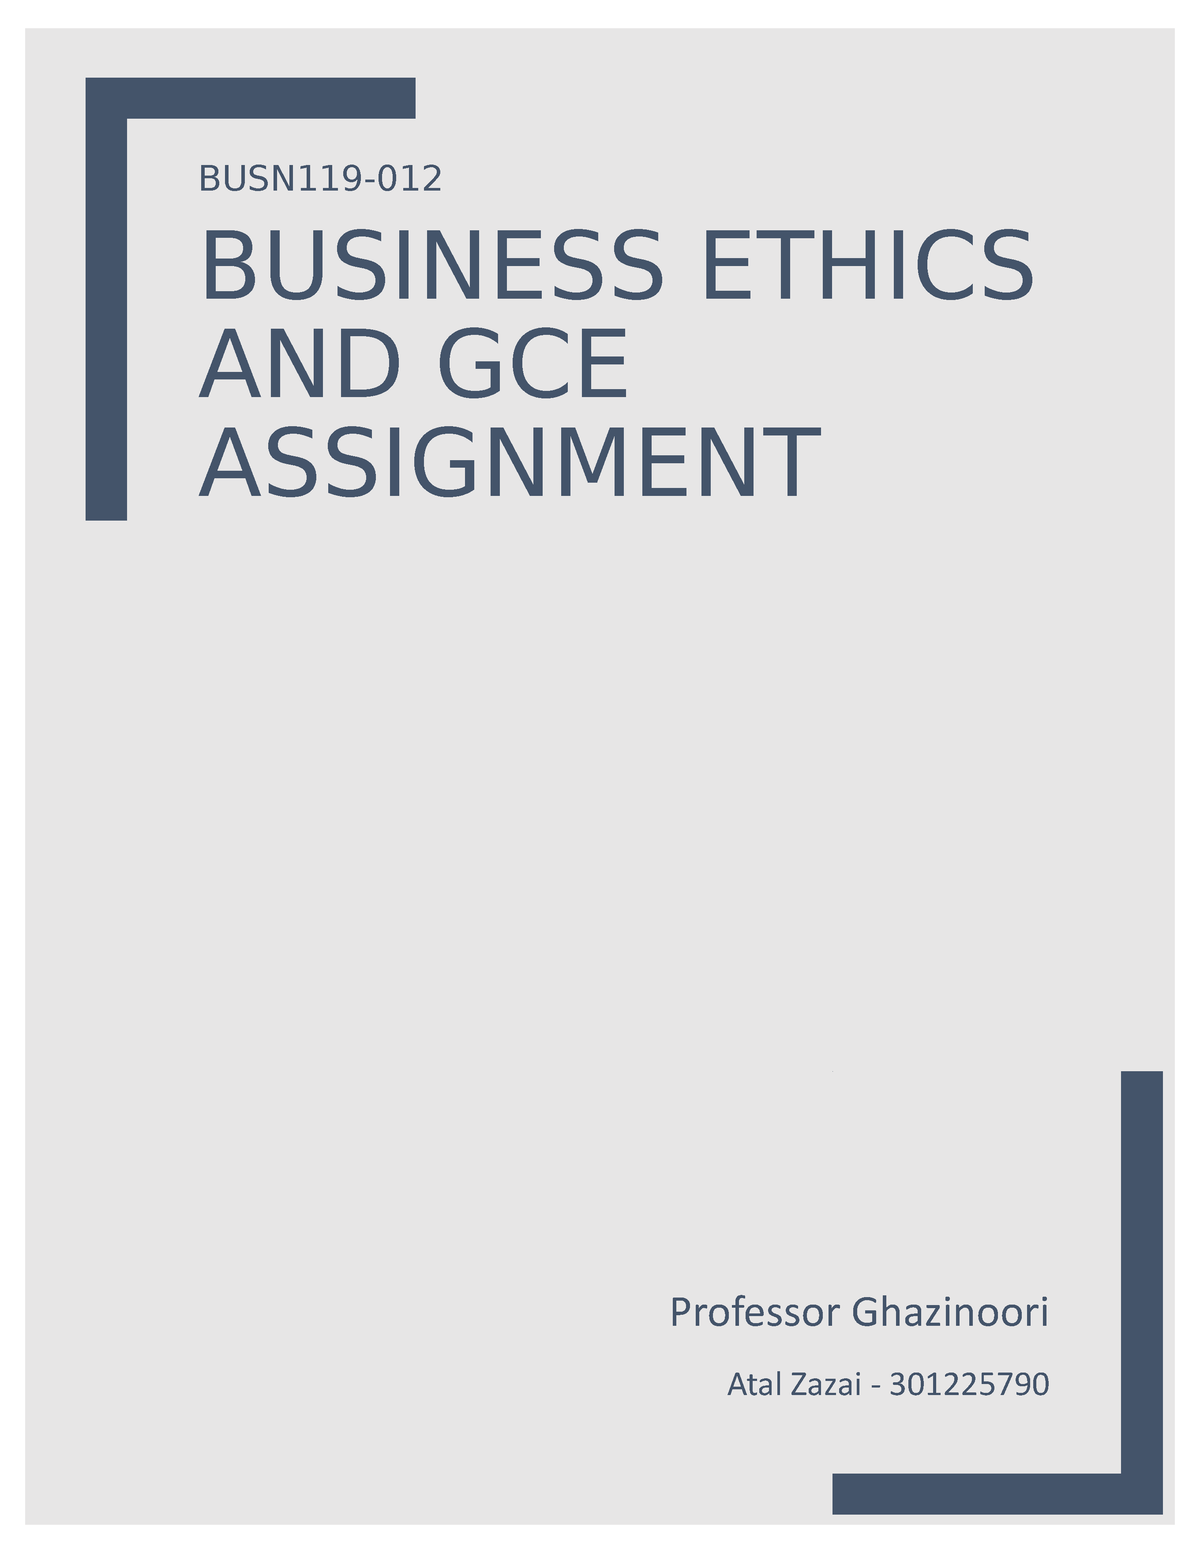 gce and business ethics assignment